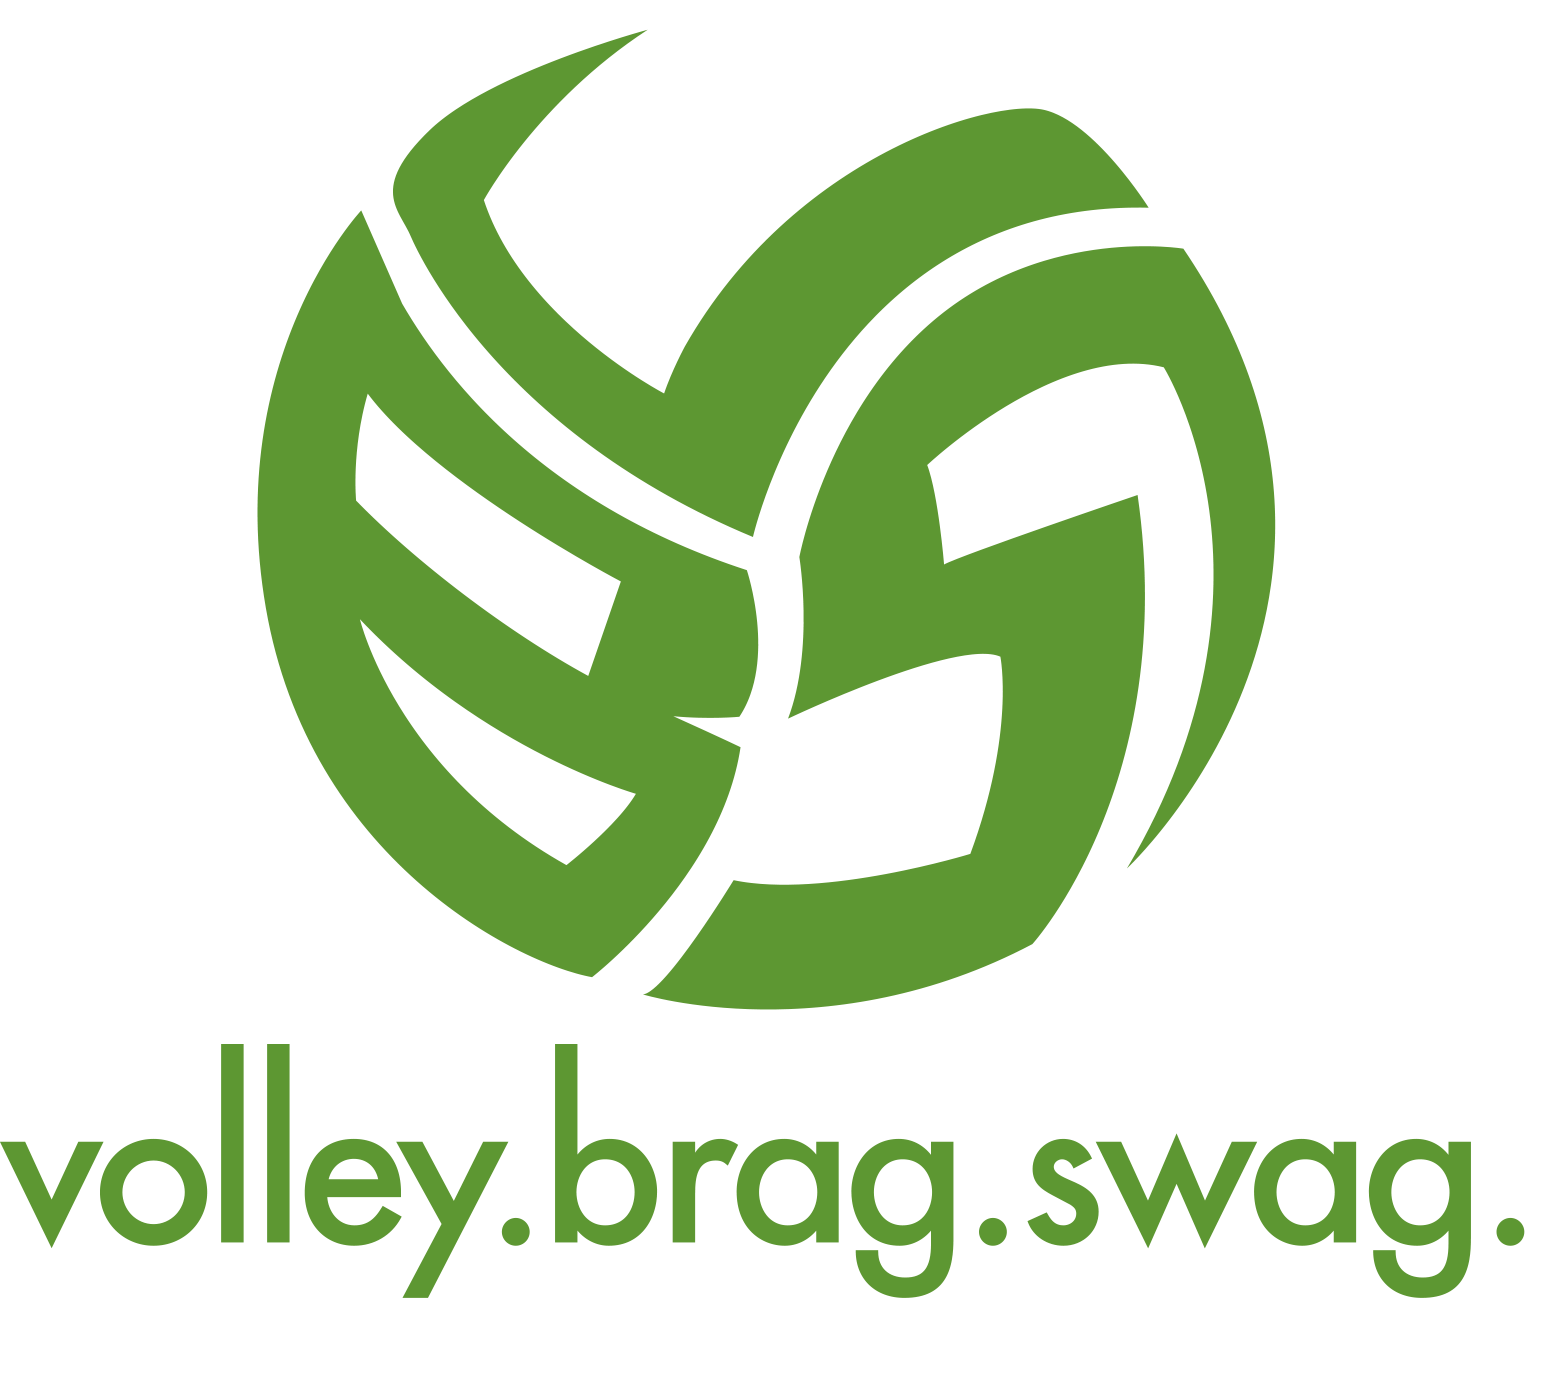 Volleyball T Shirt Ideas By Volleybragswag Is Beast Inspired Attire created in 2013 by April Chapple. The Volleybragswag ball logo design.